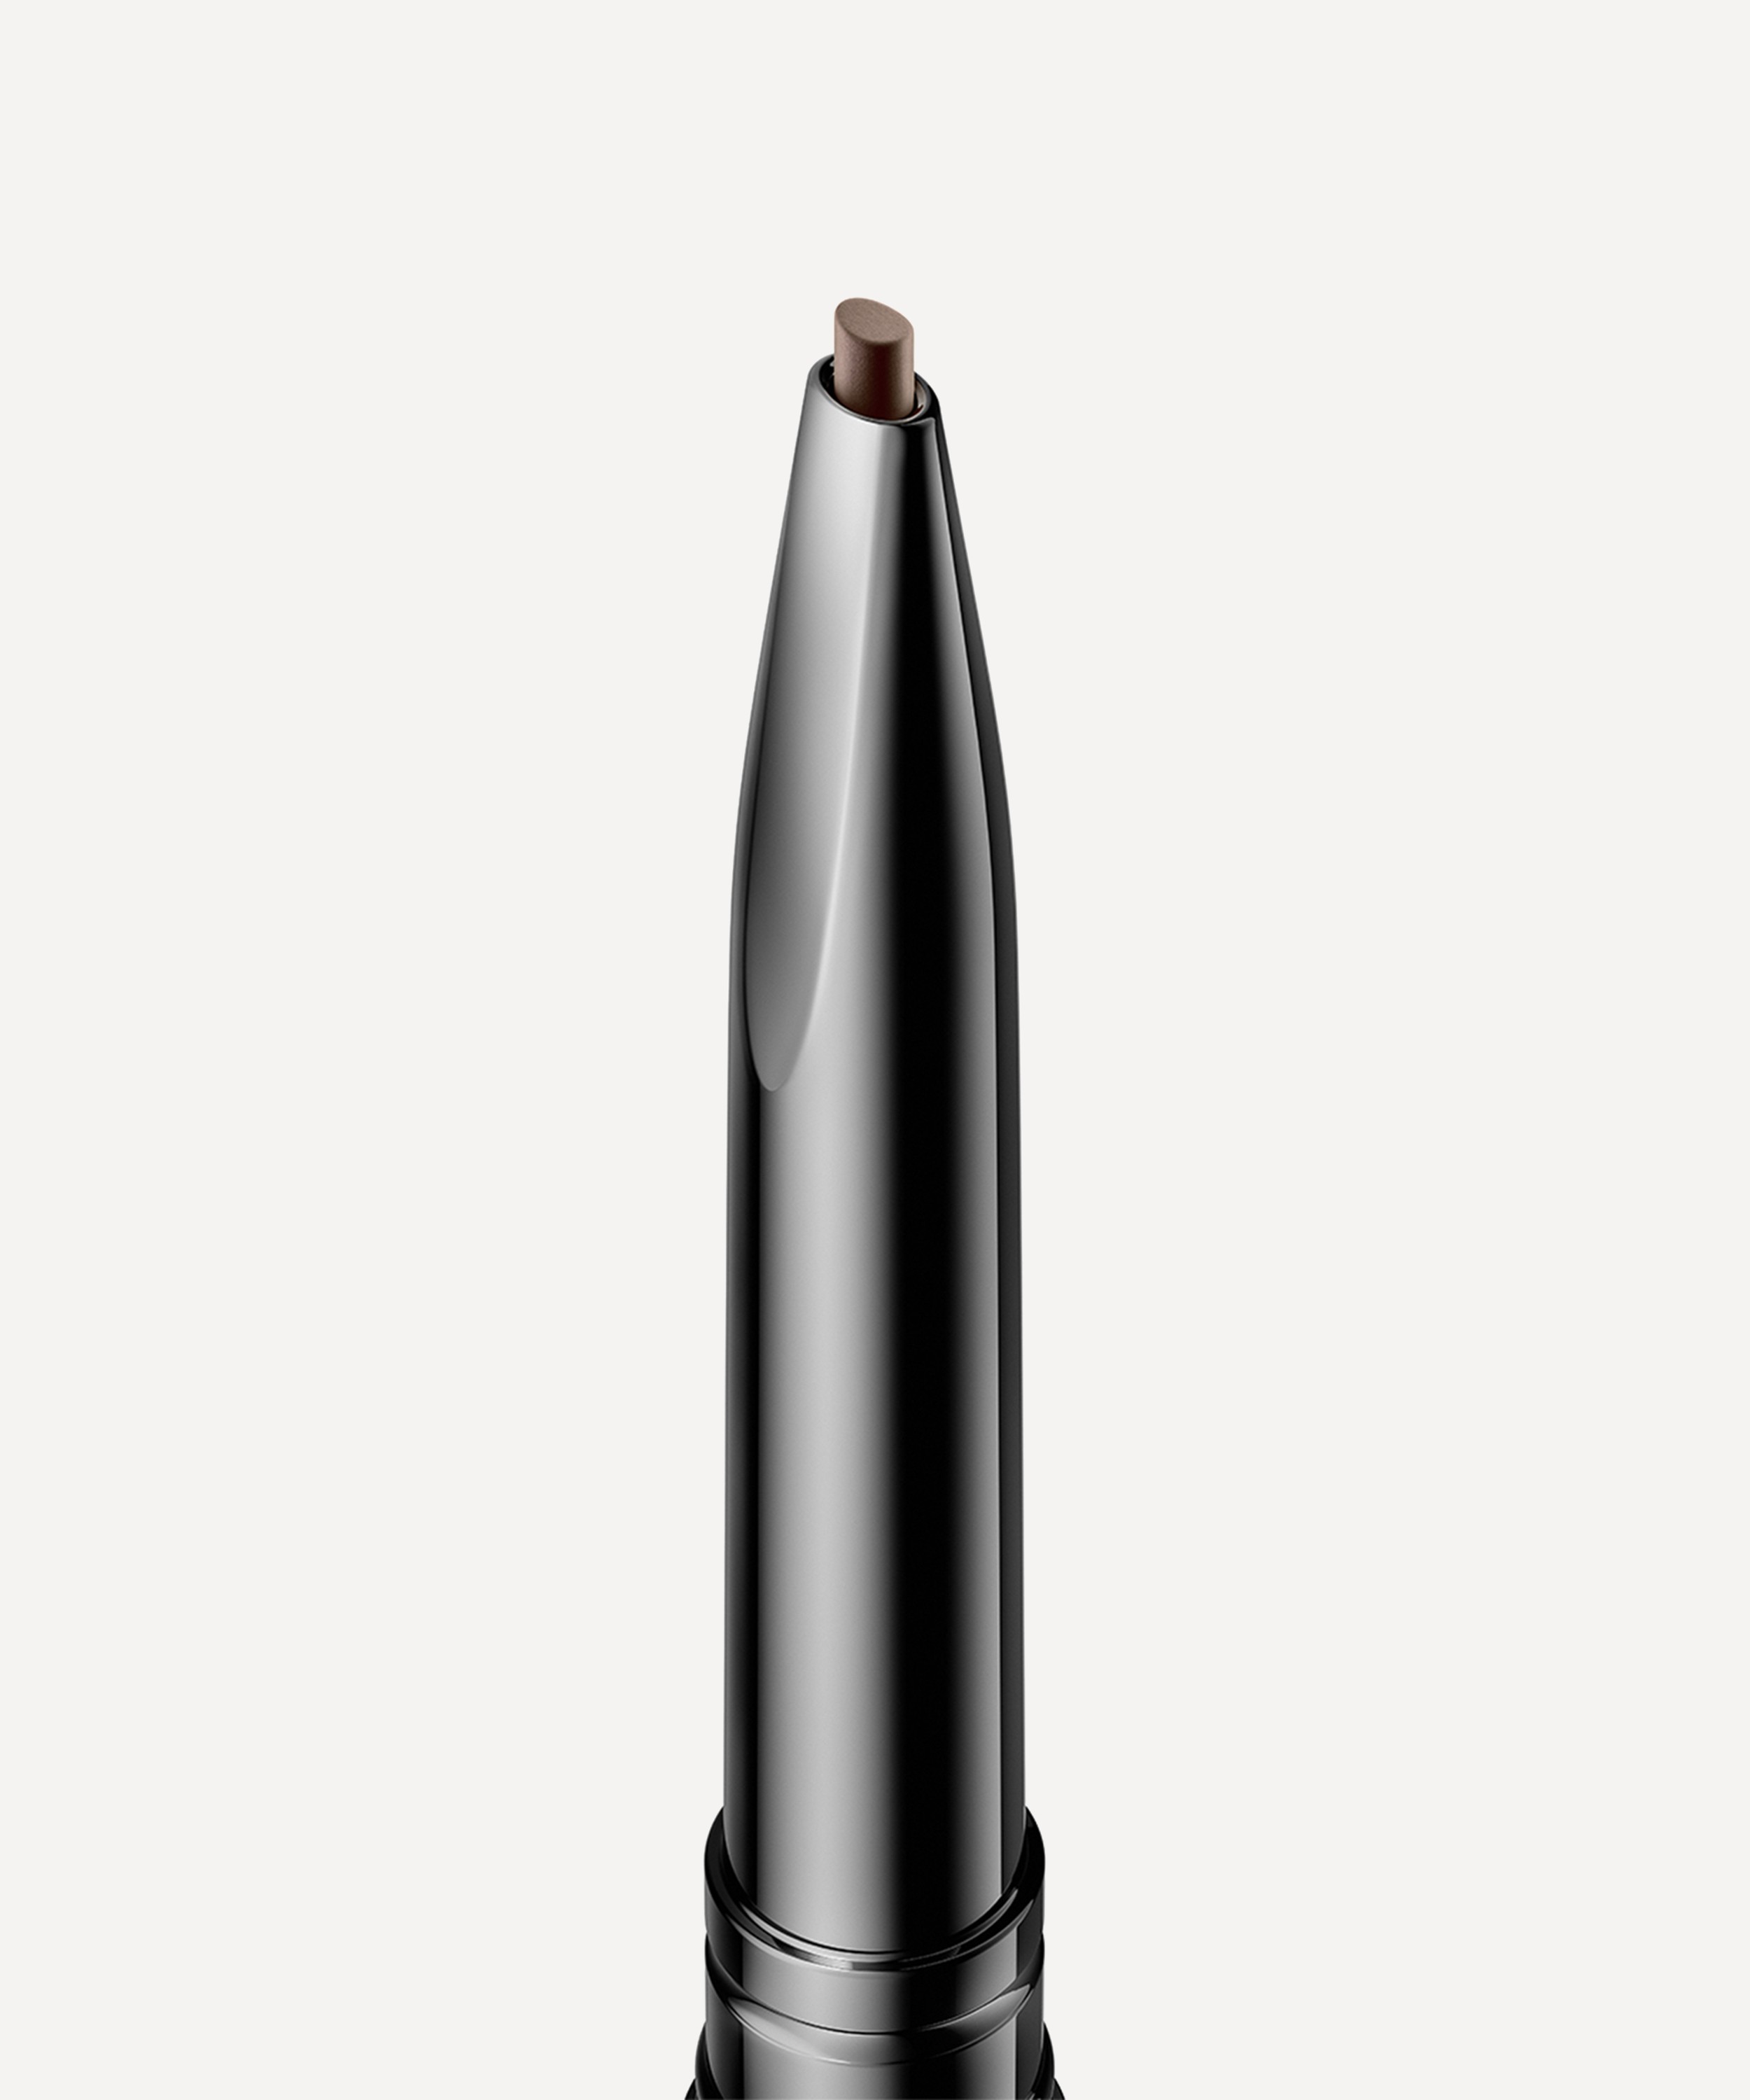 Hourglass - Arch Brow Sculpting Pencil 0.4g